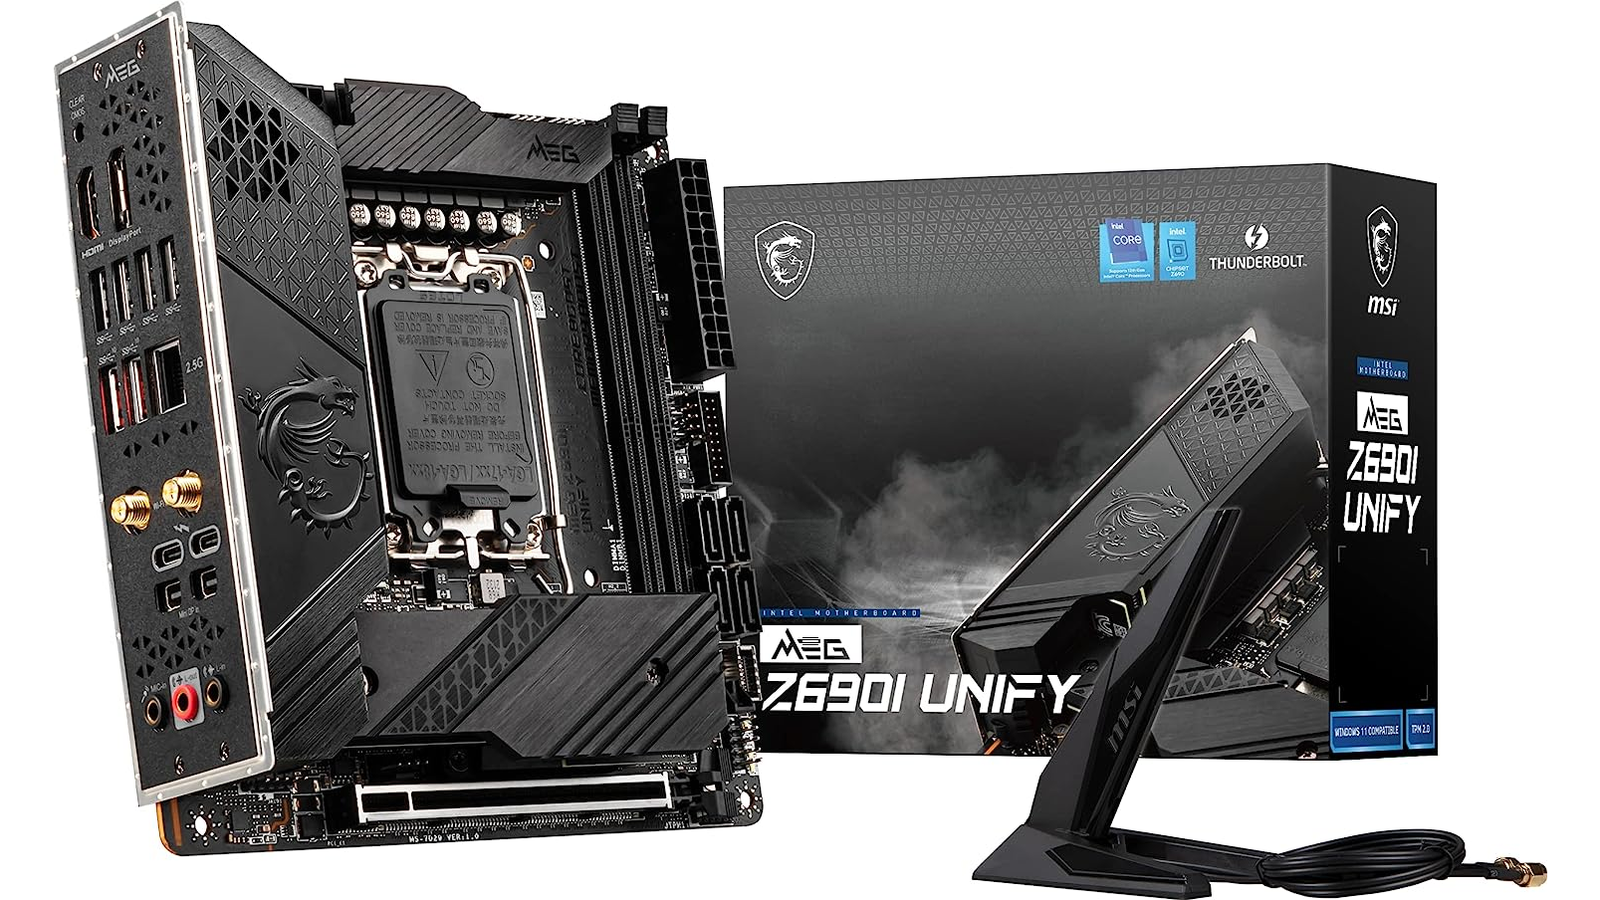 Pick up MSI's high-end Z690 Mini ITX motherboard for $90 off